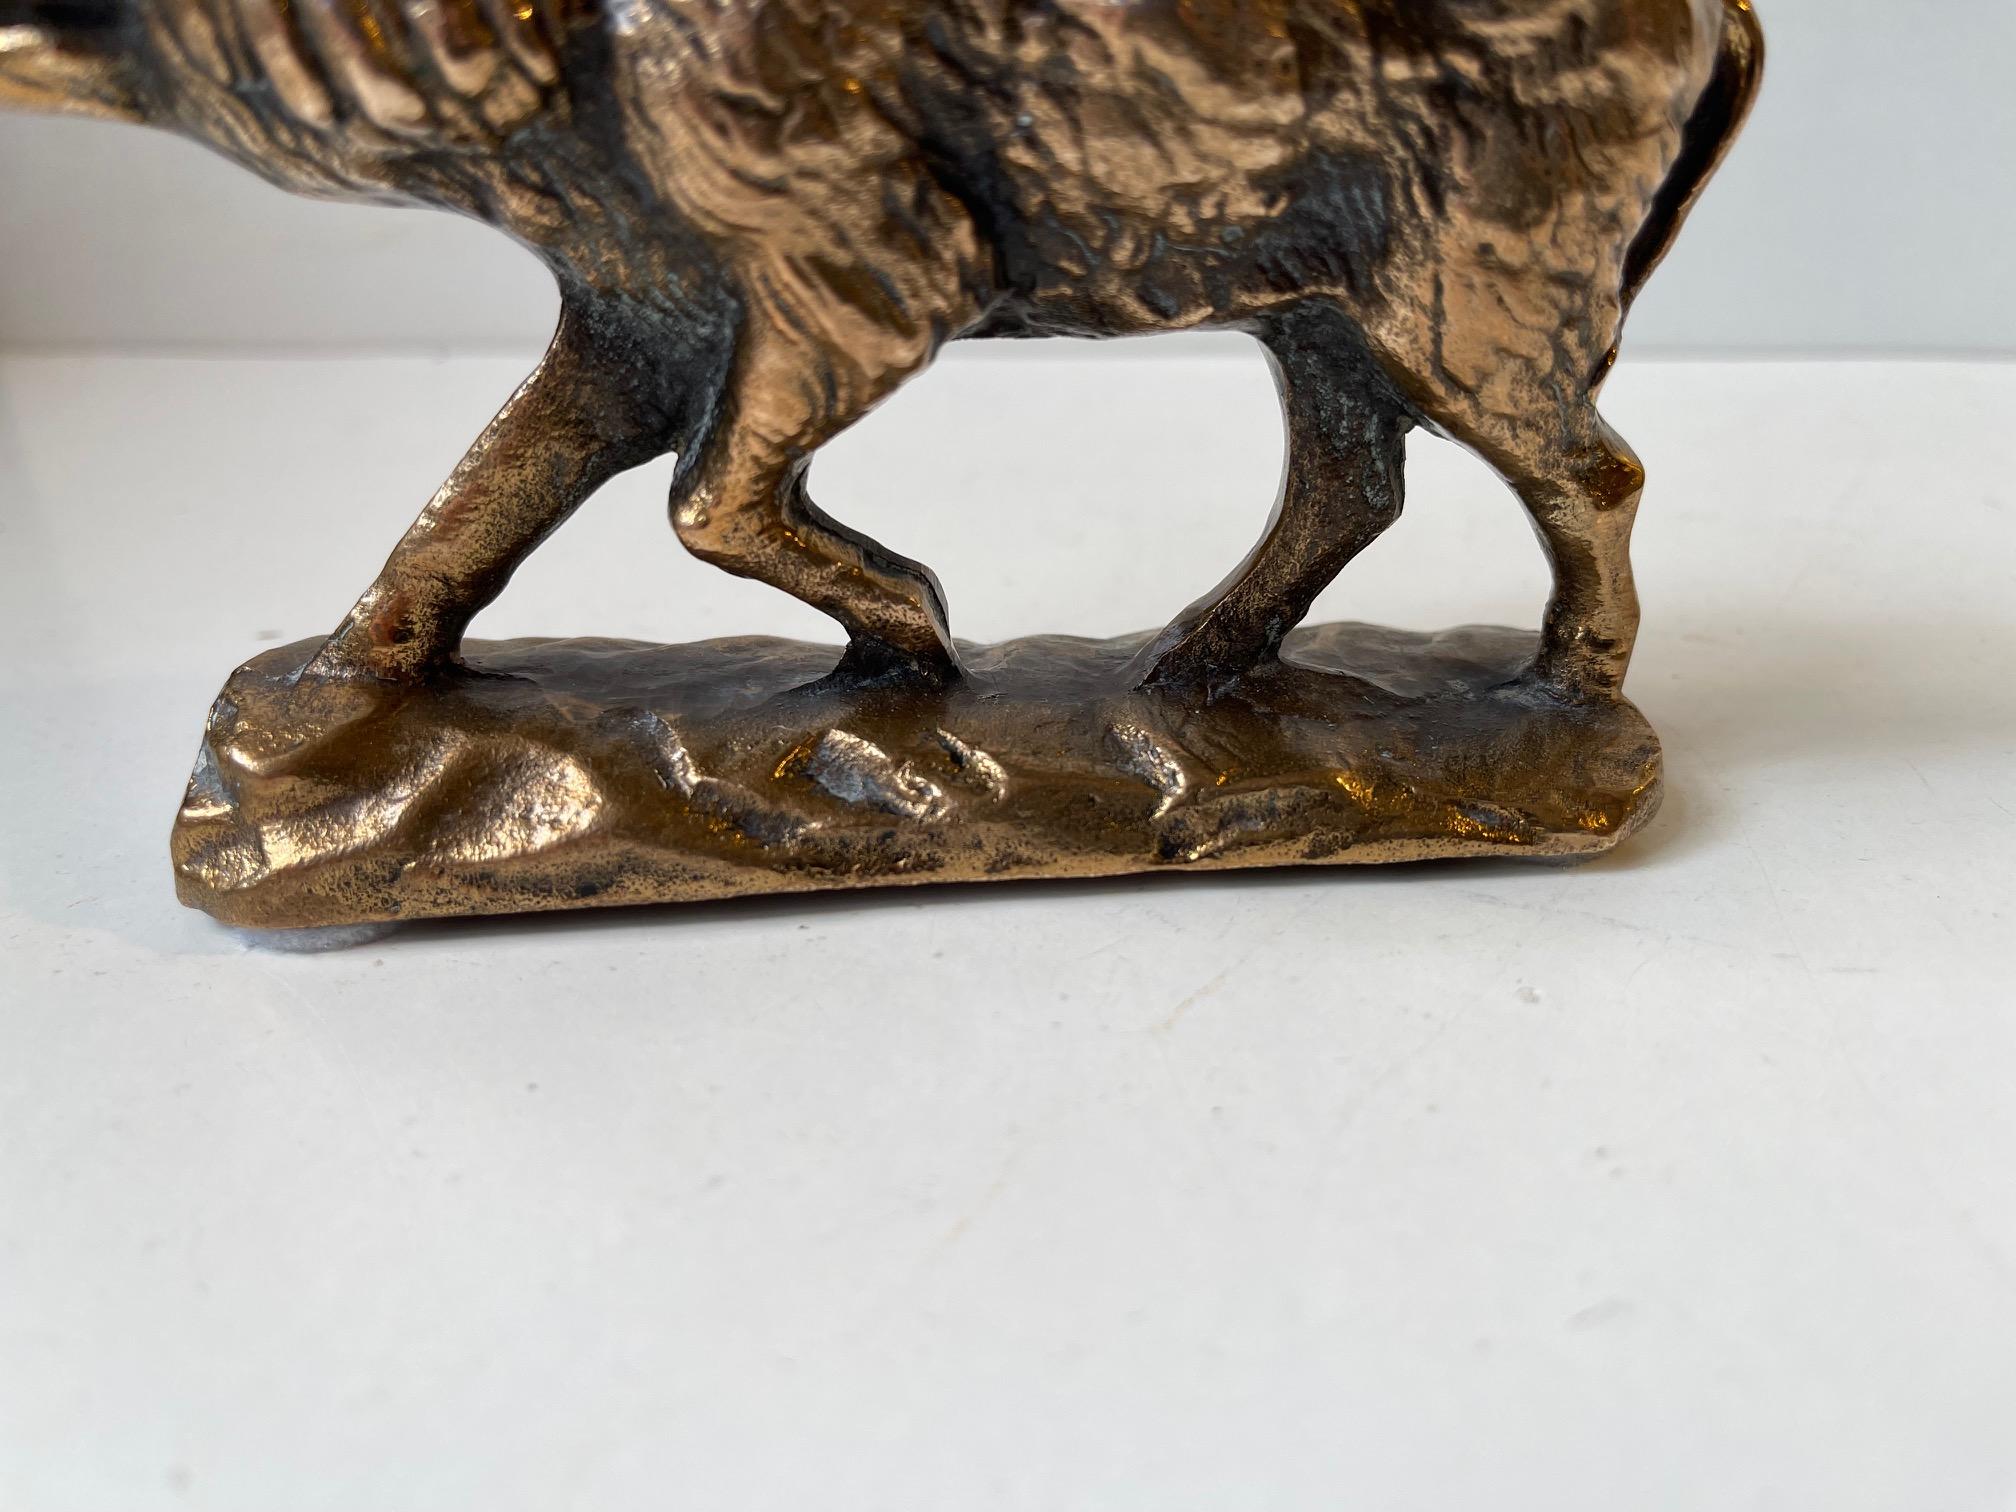 French Antique Wild Boar Sculpture in Bronze, France, 1920s For Sale